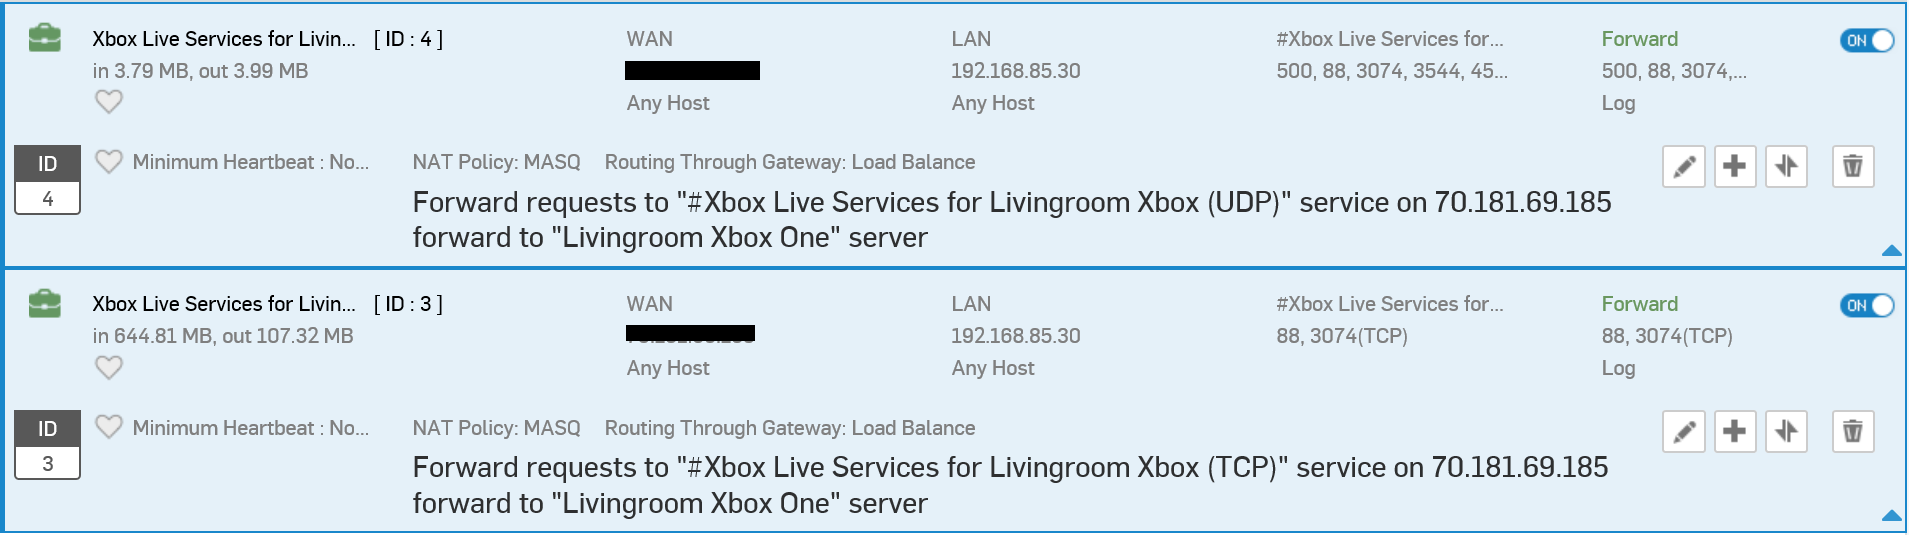 aanklager avond Deuk Port Forwarding Xbox Live Services to Xbox One Results 'Strict NAT'. -  Discussions - Sophos Firewall - Sophos Community